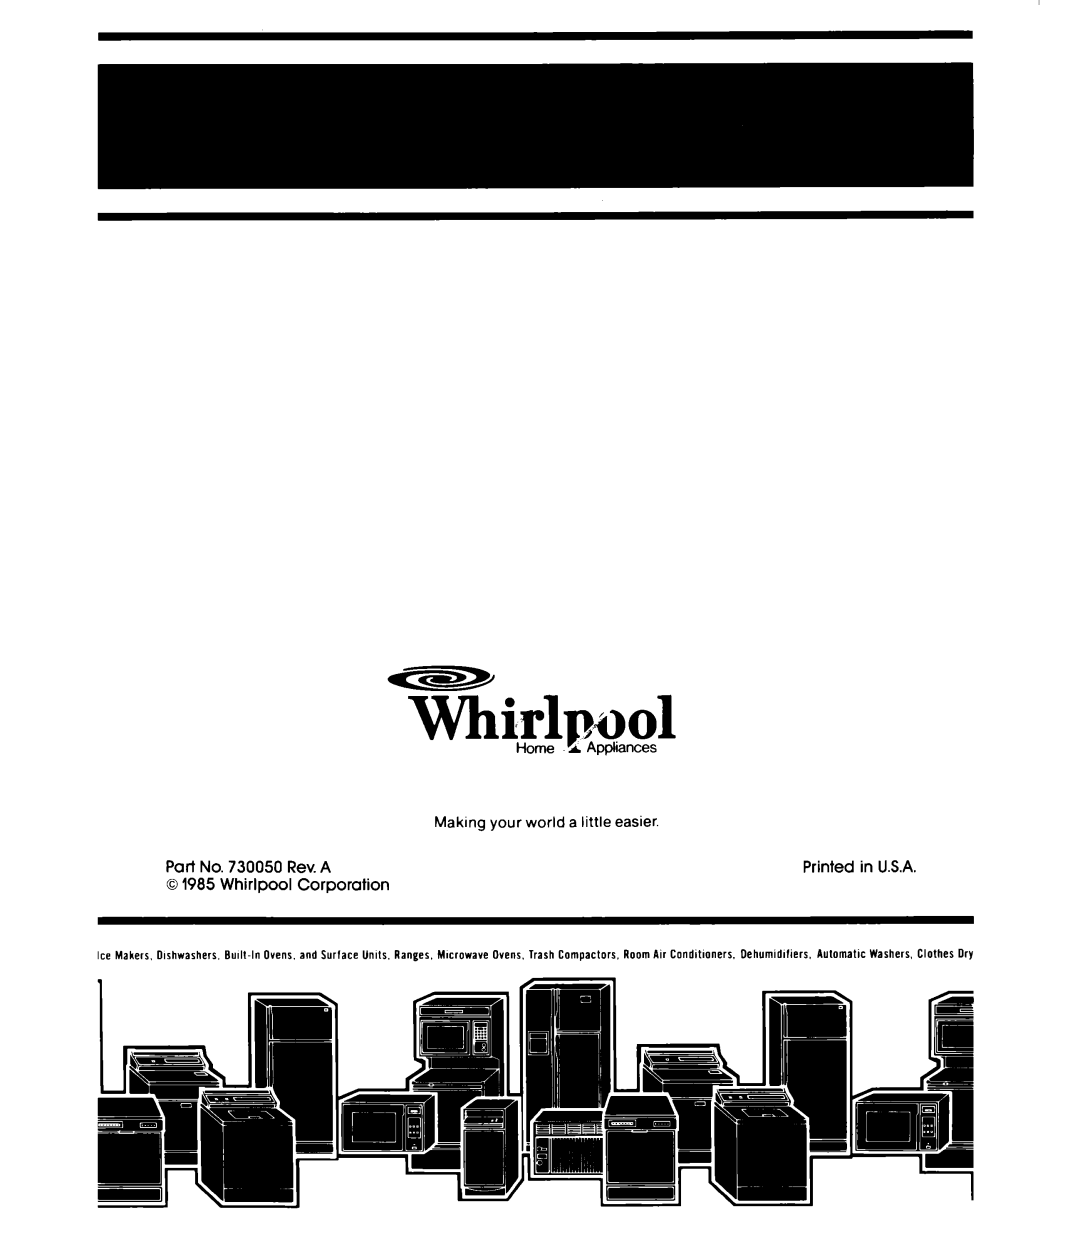 Whirlpool EHl5EF whidpool, A Appliances, Making your world a little easier, Rev. A, 0 1985 Whirlpool, Corporation, Home 